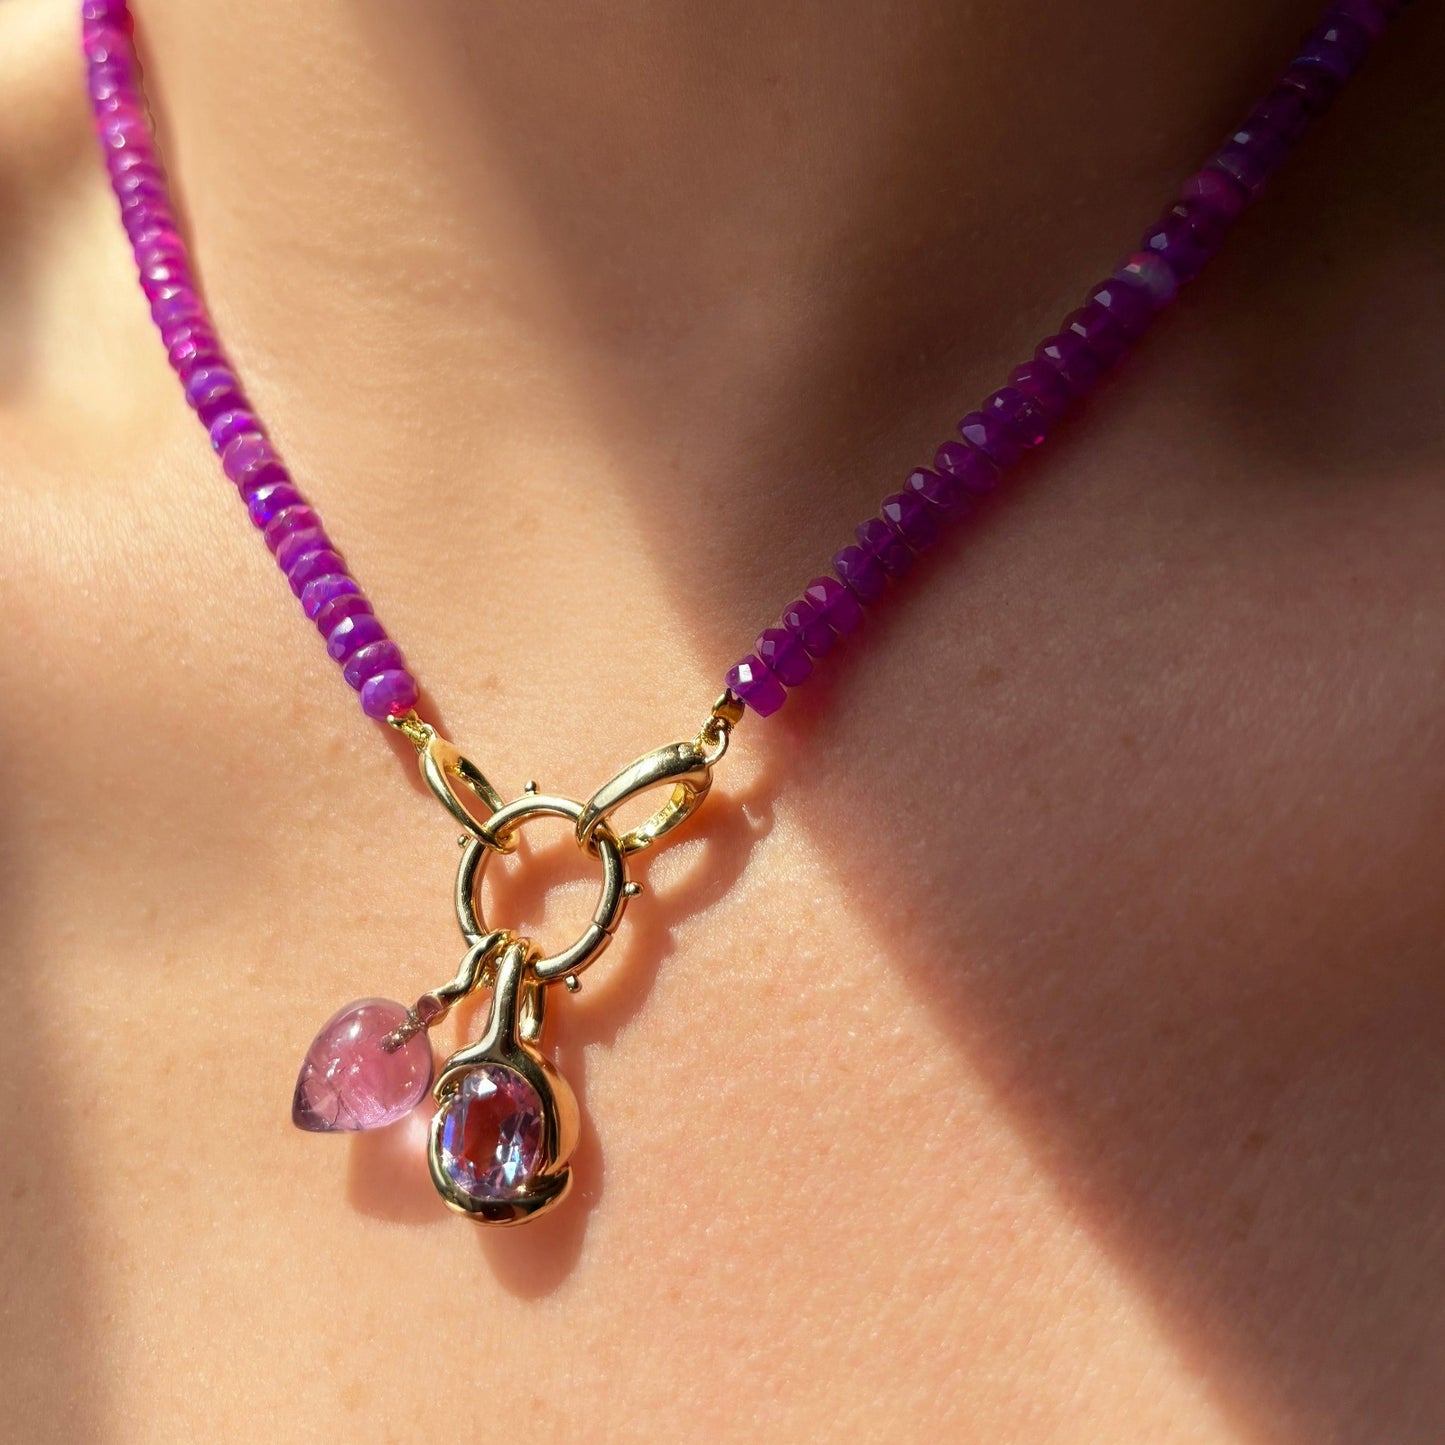 Molten knot charm with gemstone. Styled on a neck hanging from a beaded round charm lock on a beaded necklace.